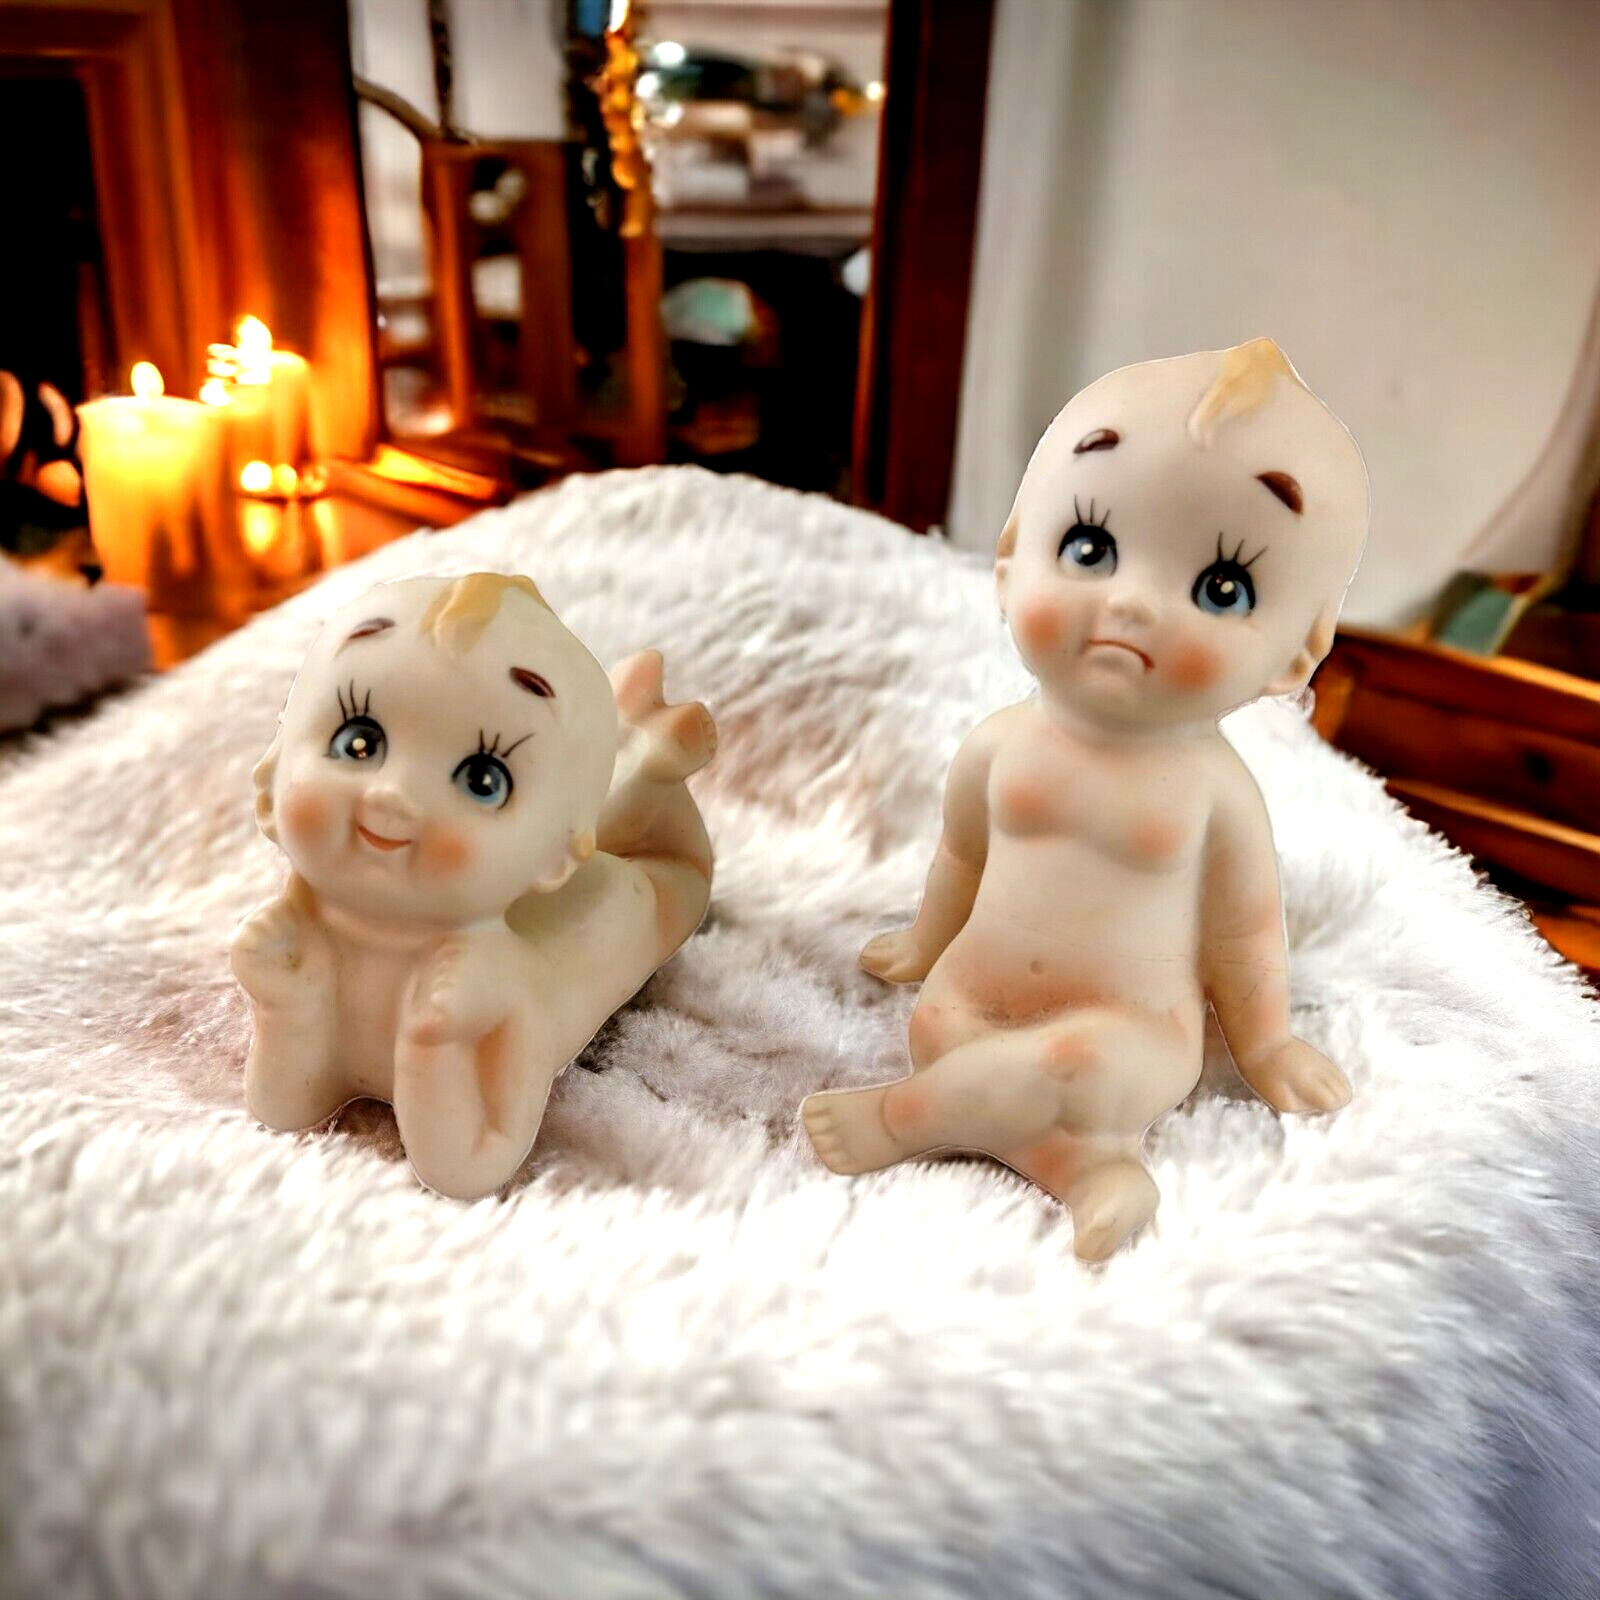 TWO Adorable Vintage Porcelain Bisque KEWPIE Doll Piano Baby Figure Figurine